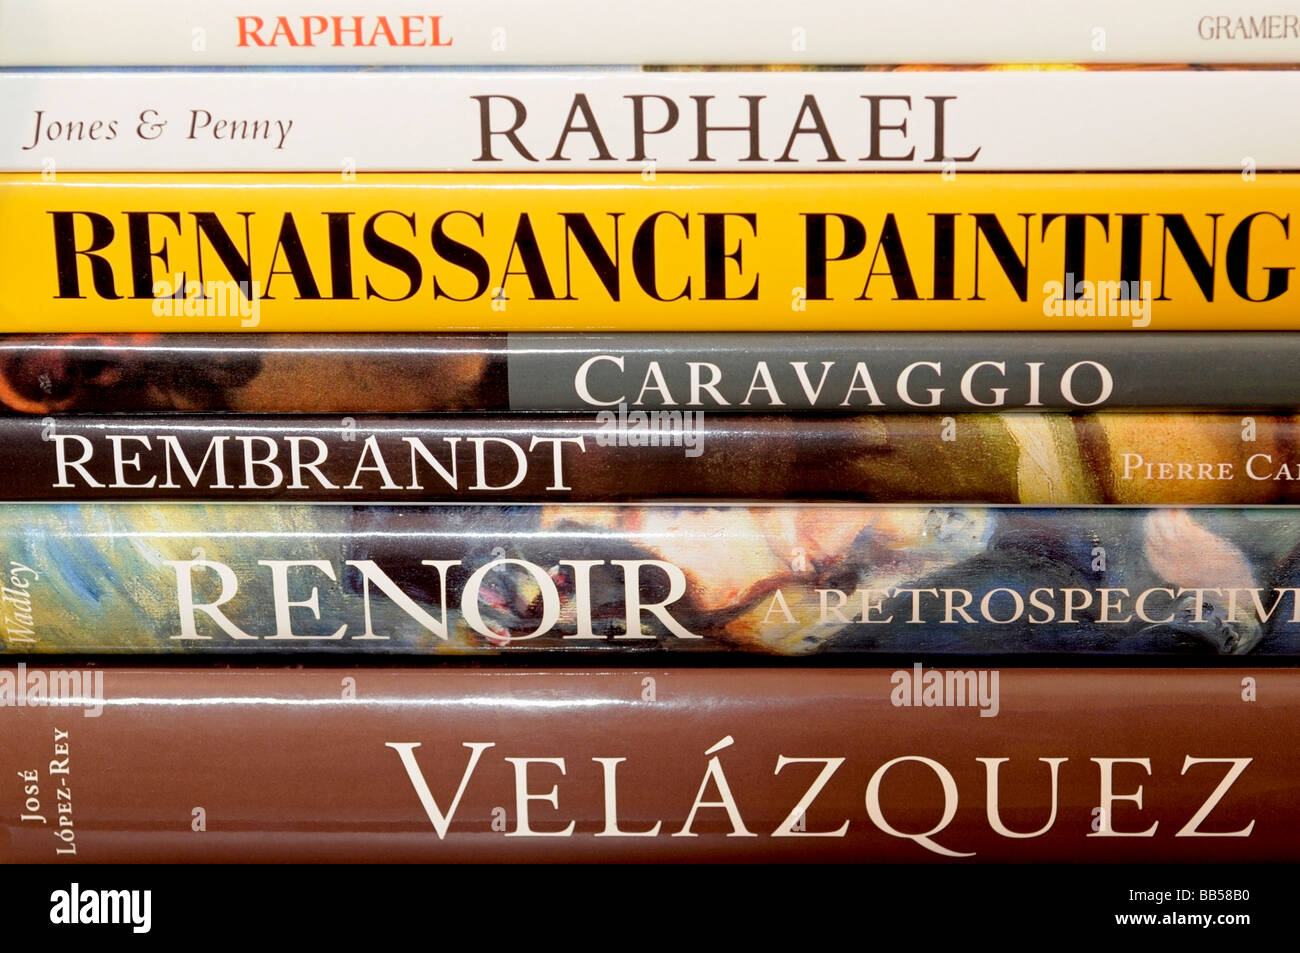 Book Spines Painters and Paintings Stock Photo